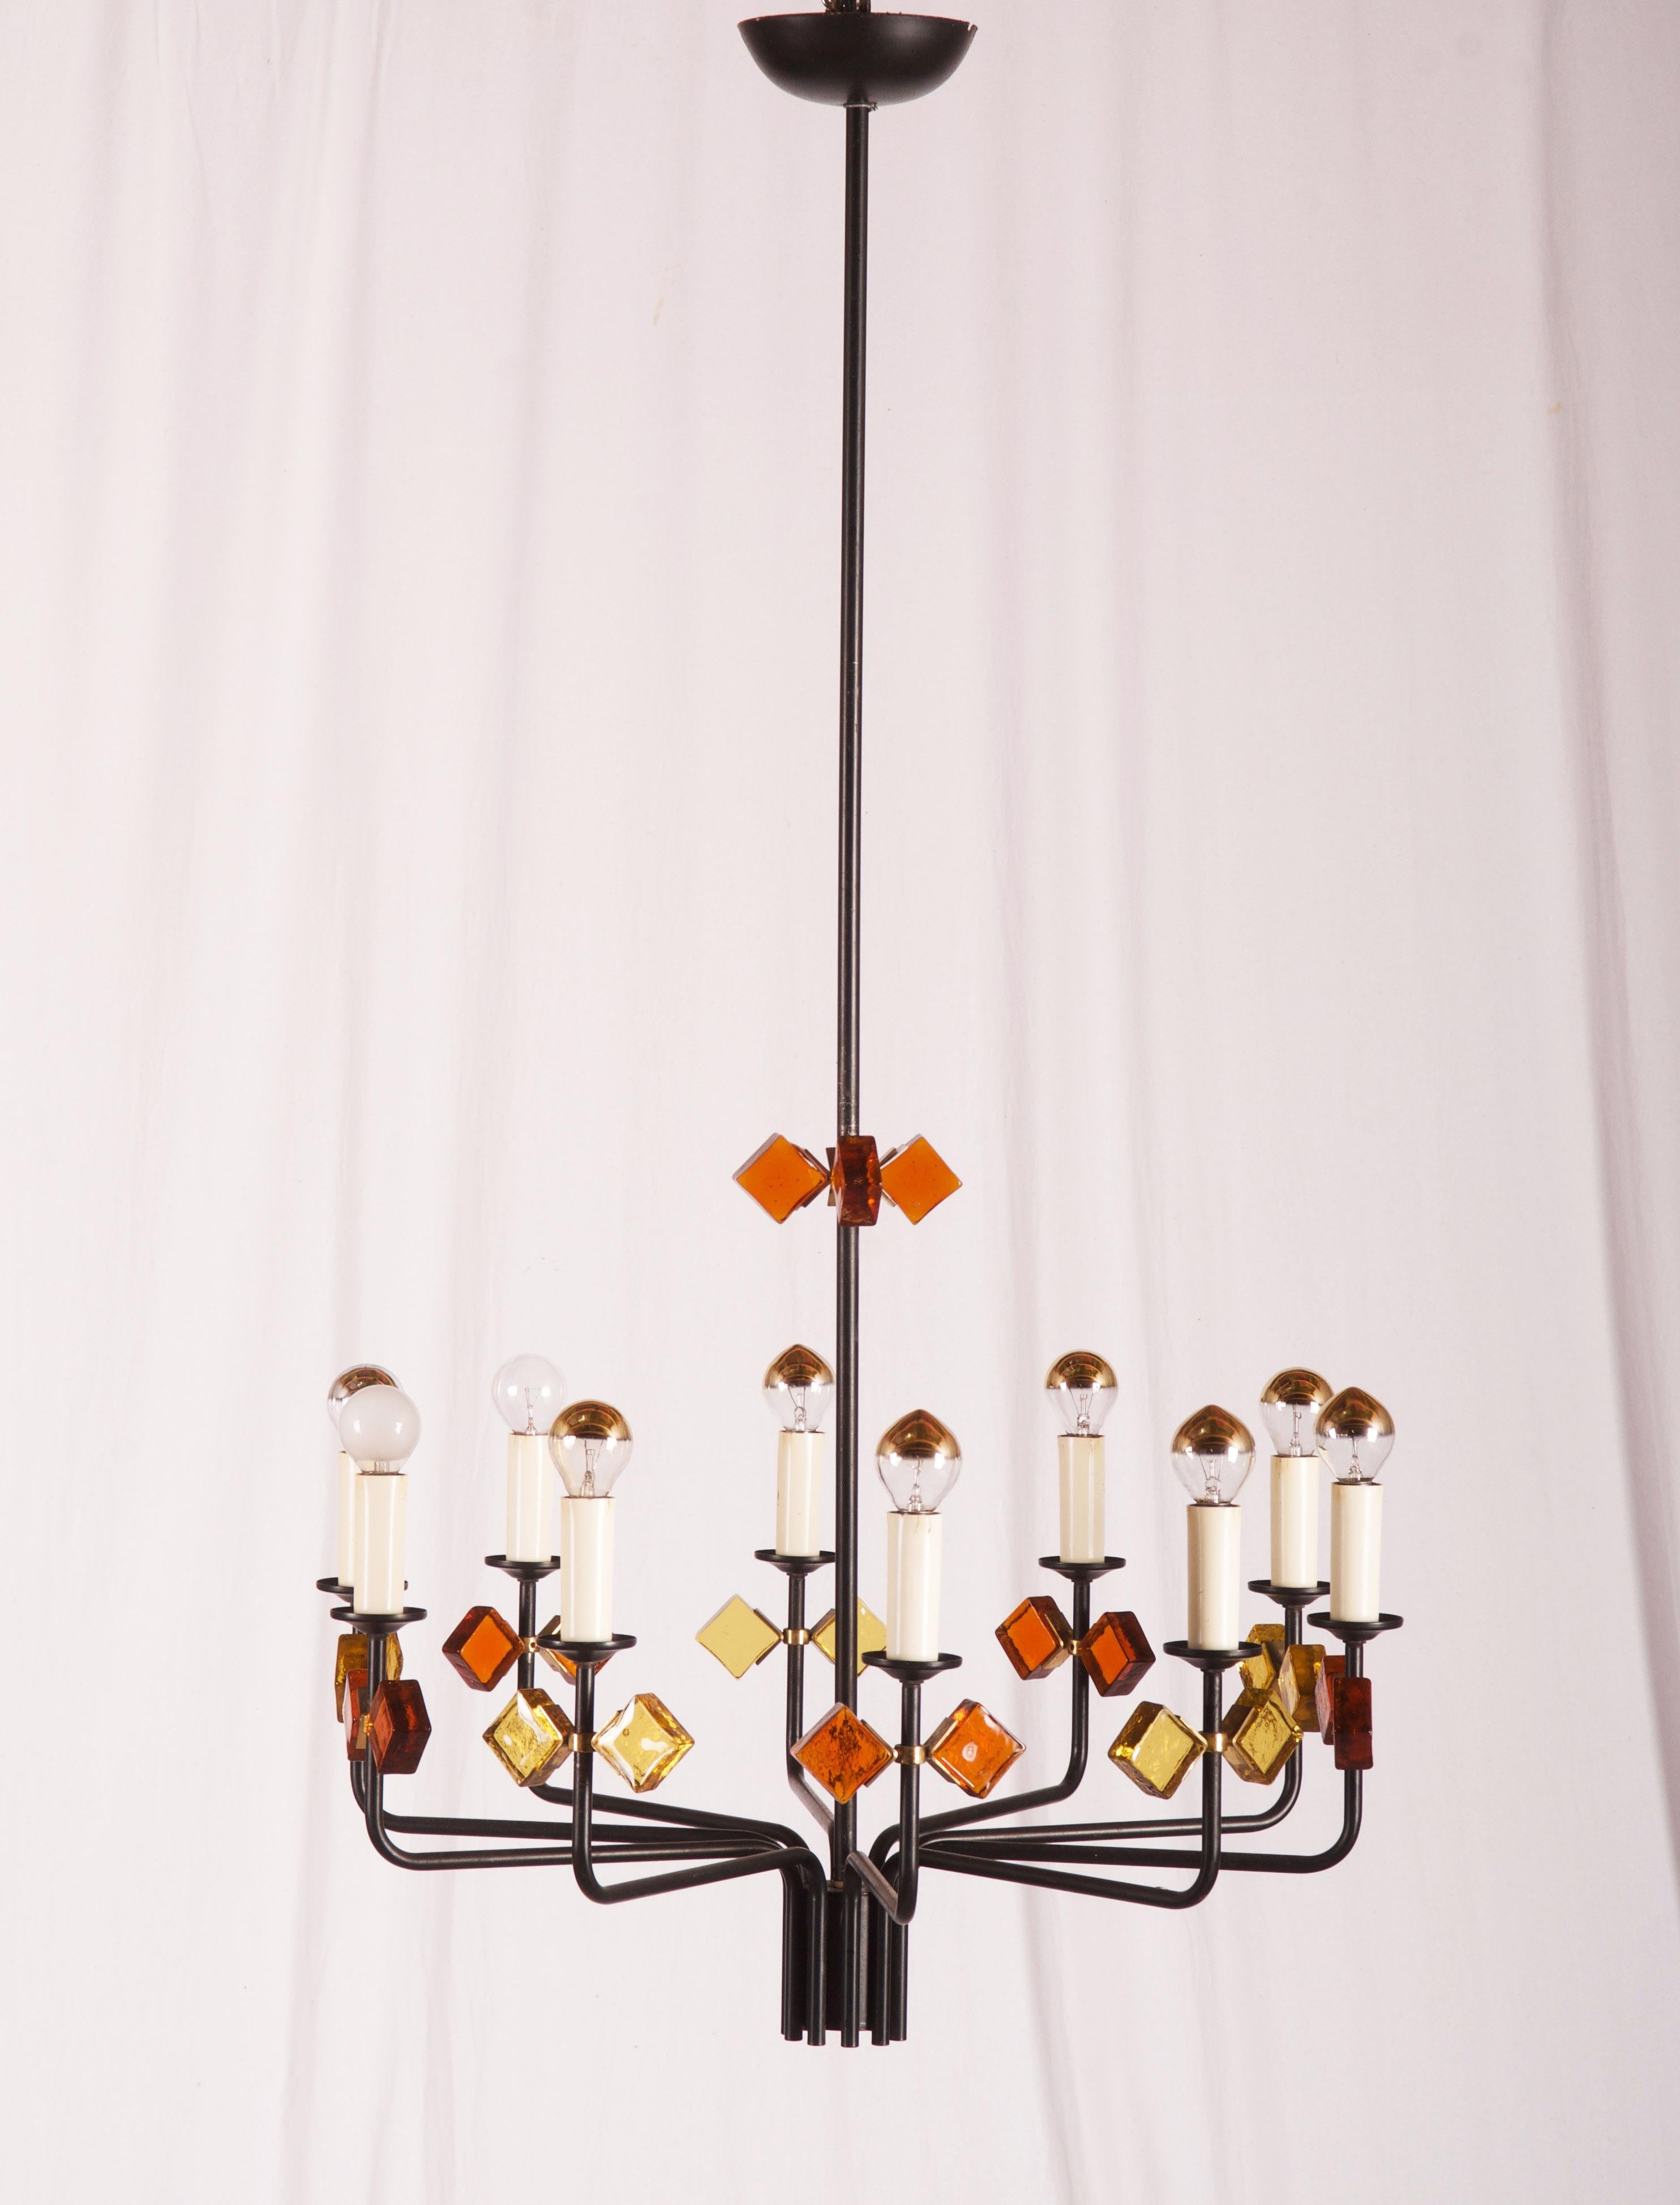 Iron frame black painted with yelow and orange glass elements fixed with brass ring and holders. Fitted with ten E14 sockets. Designed in Danmark in the 1950s by Svend Aage Holm Sorensen for Holm Sorensen and Company.
      